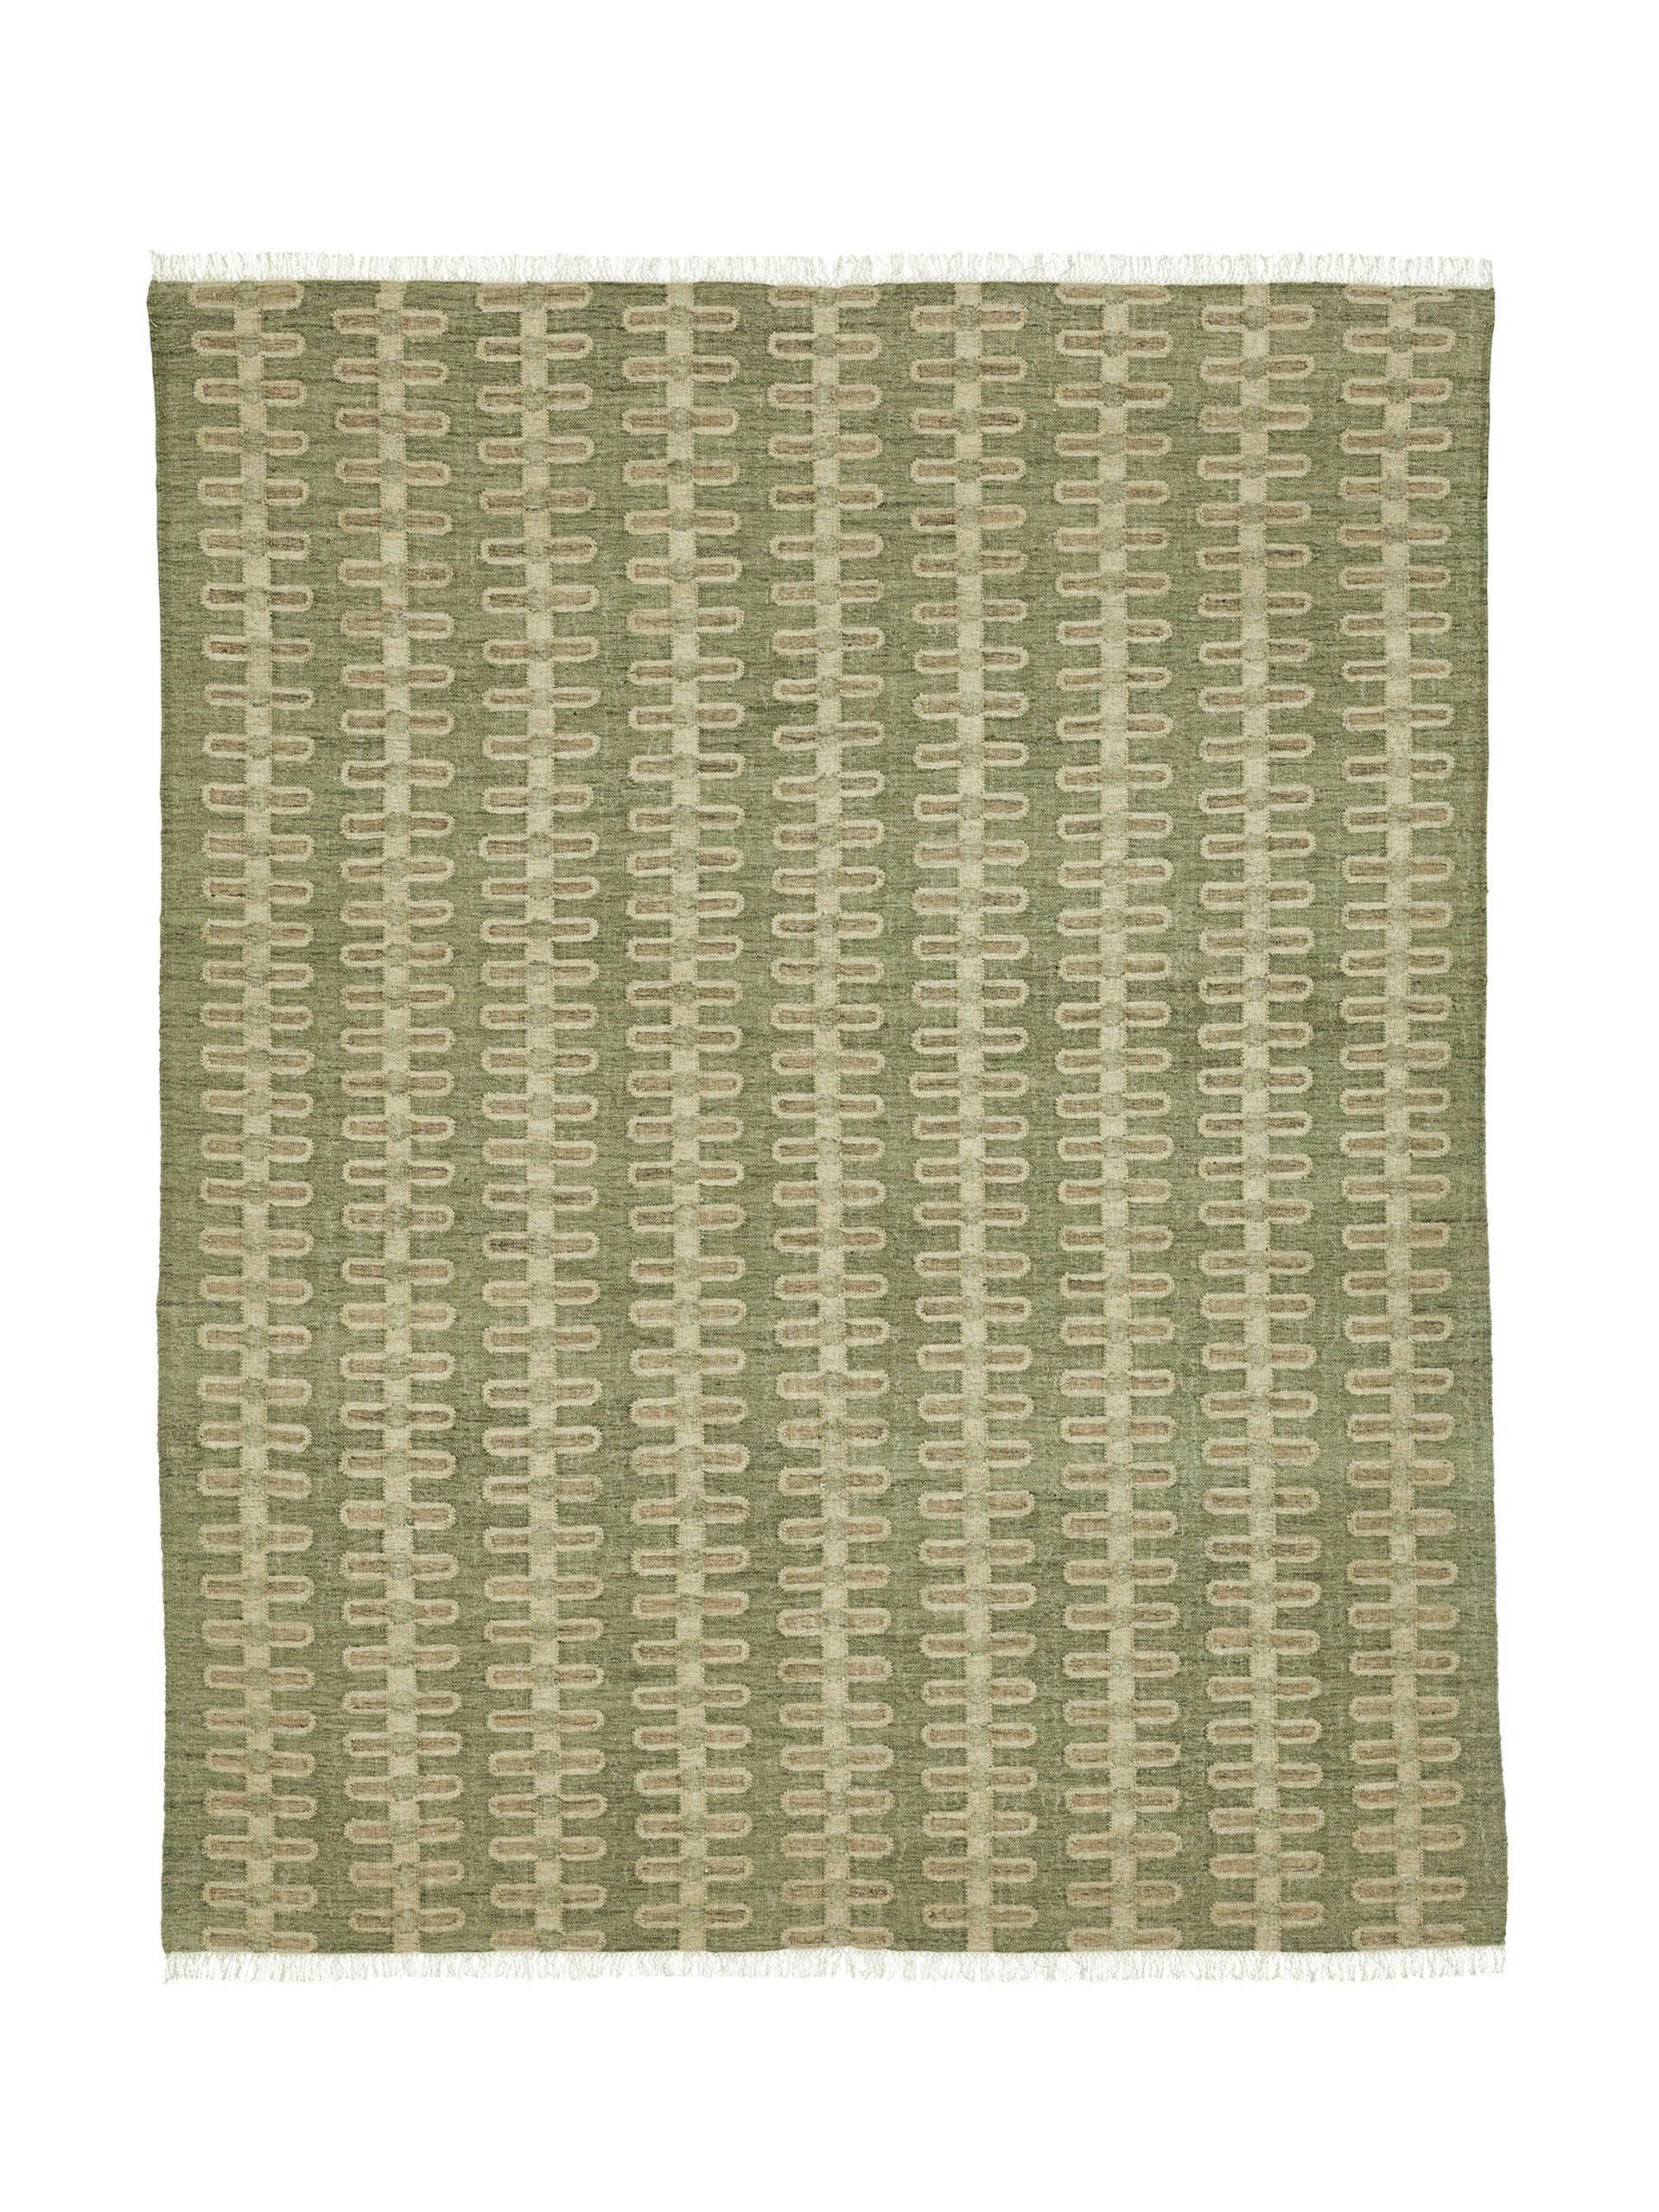 Sycamore green and cream rug